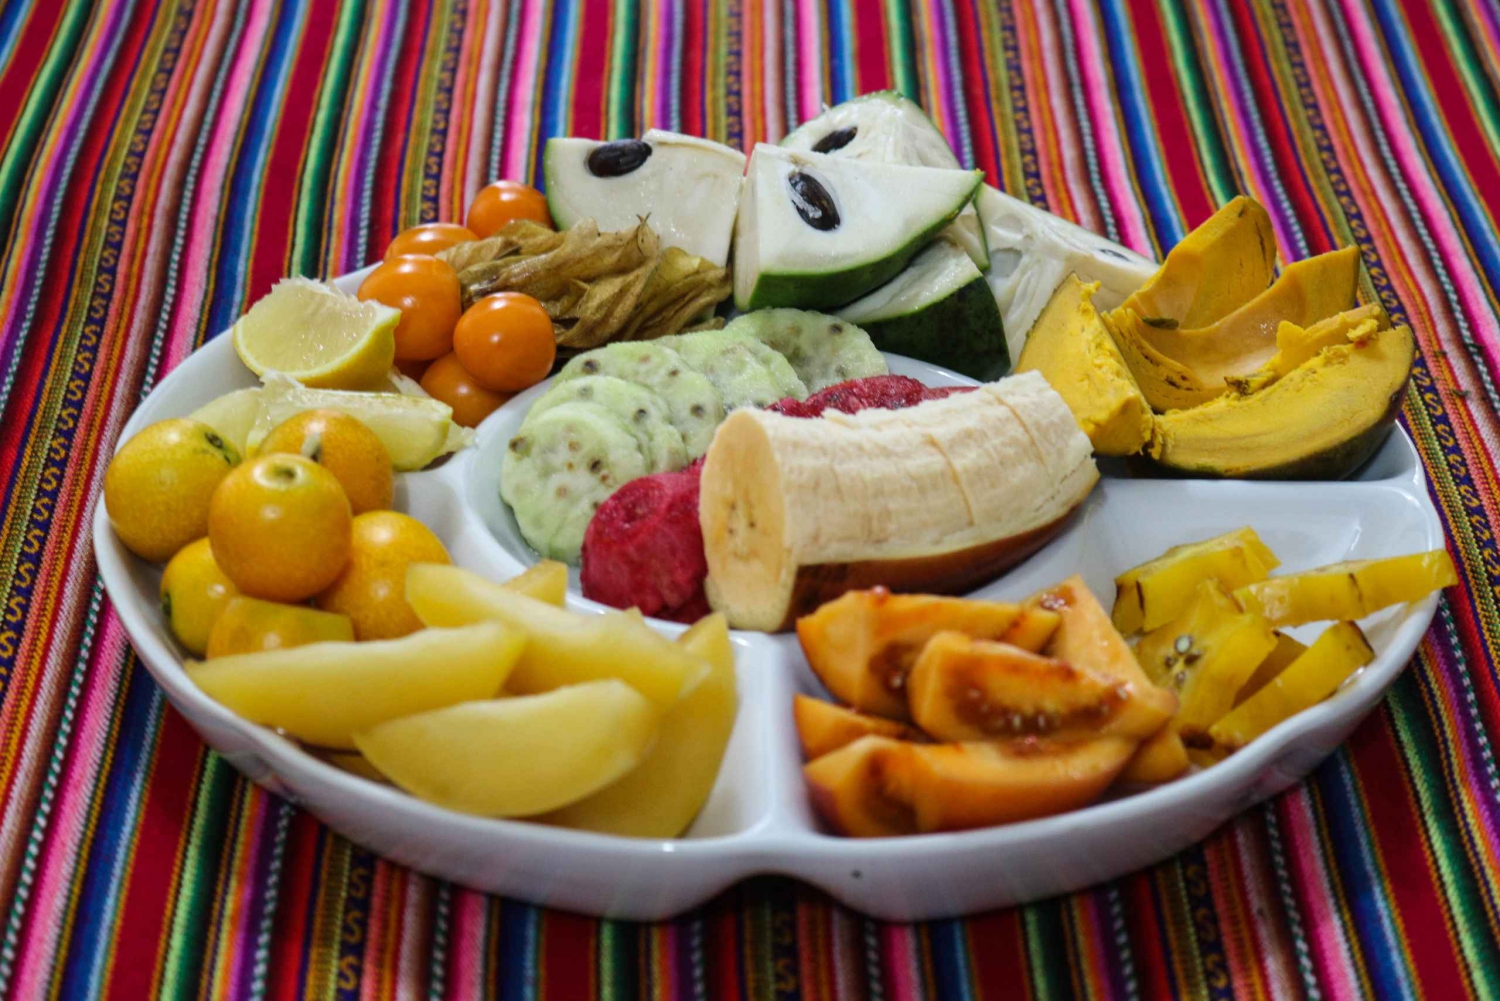 Lima: Peruvian Cooking Class with Market Tour, Exotic fruits